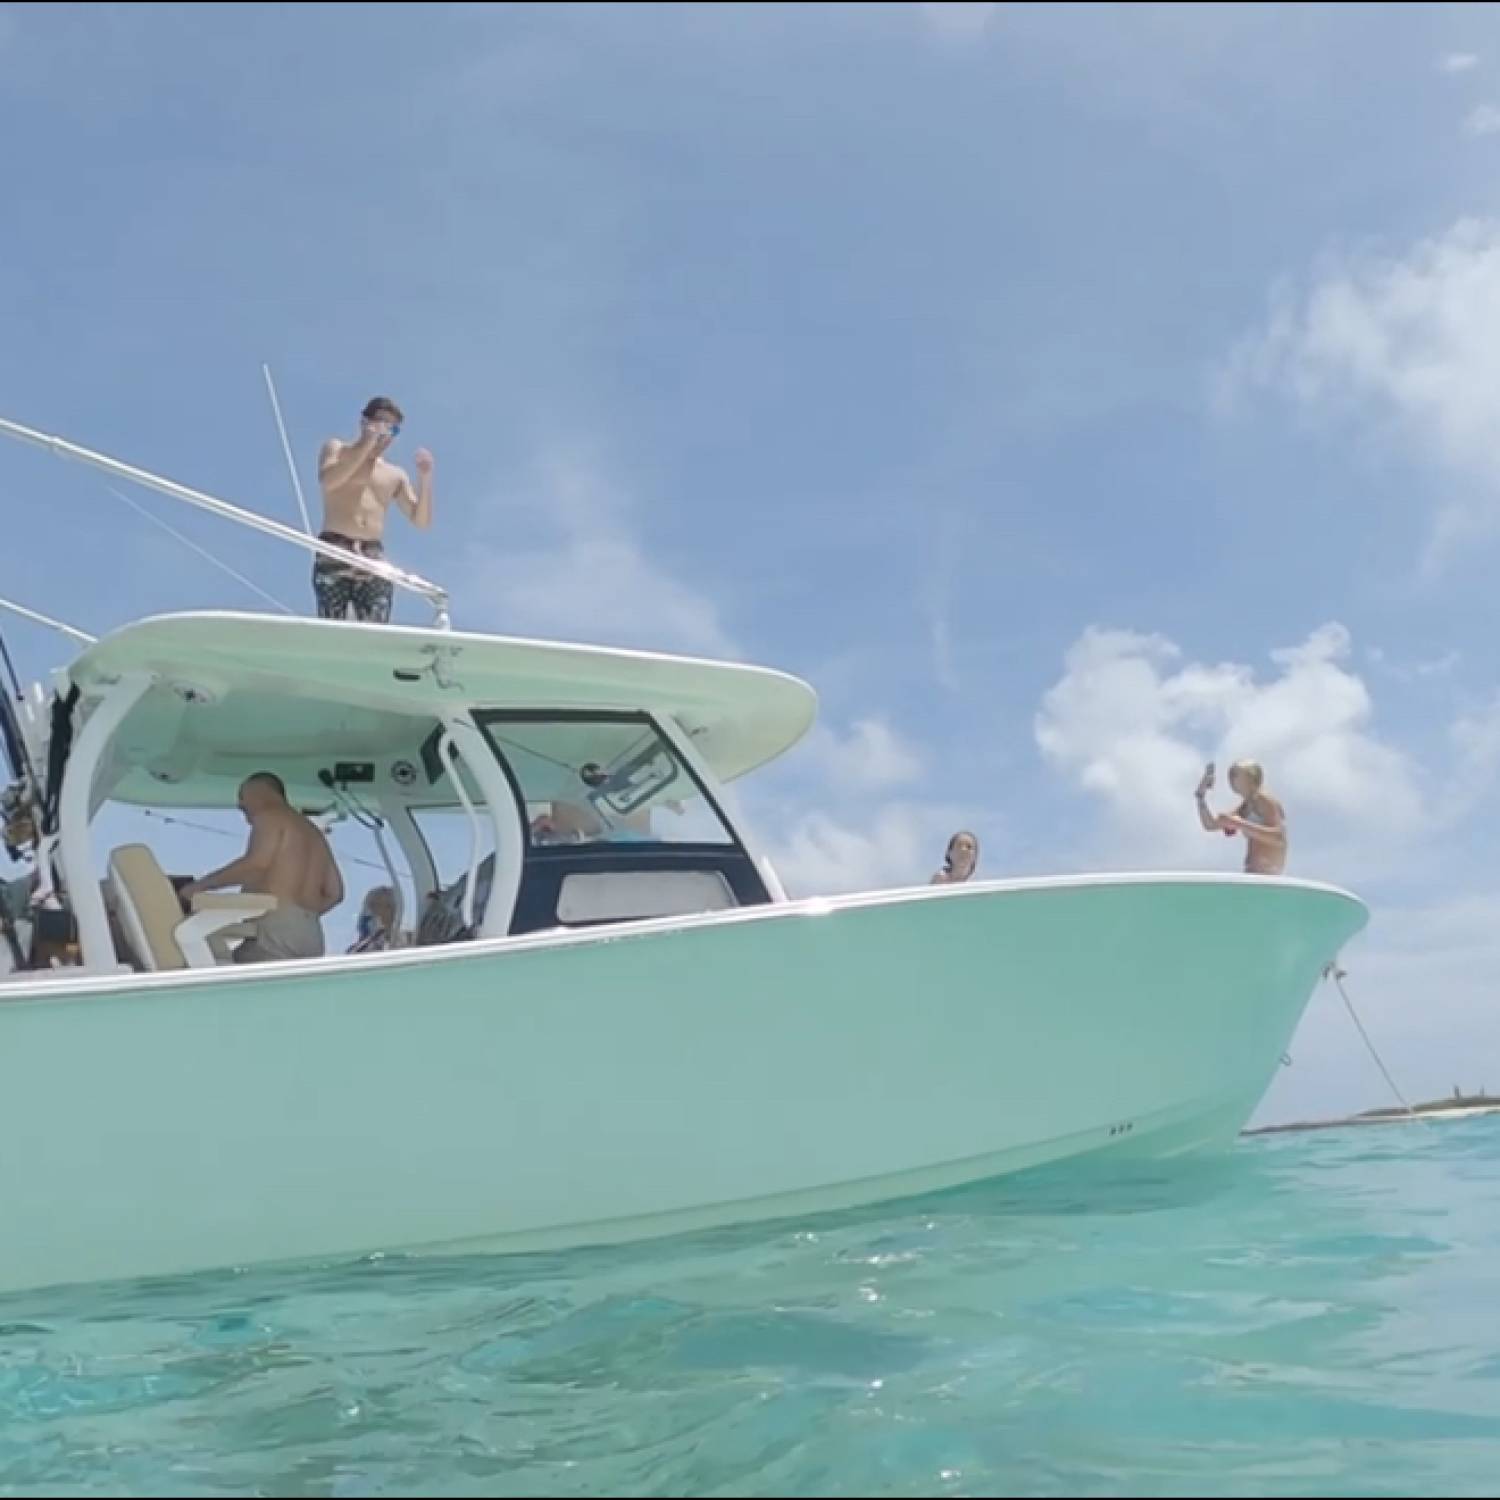 Title: Bimini adventure - On board their Sportsman Open 352 Center Console - Location: Honeymoon Beach, South Bimini. Participating in the Photo Contest #SportsmanAugust2023